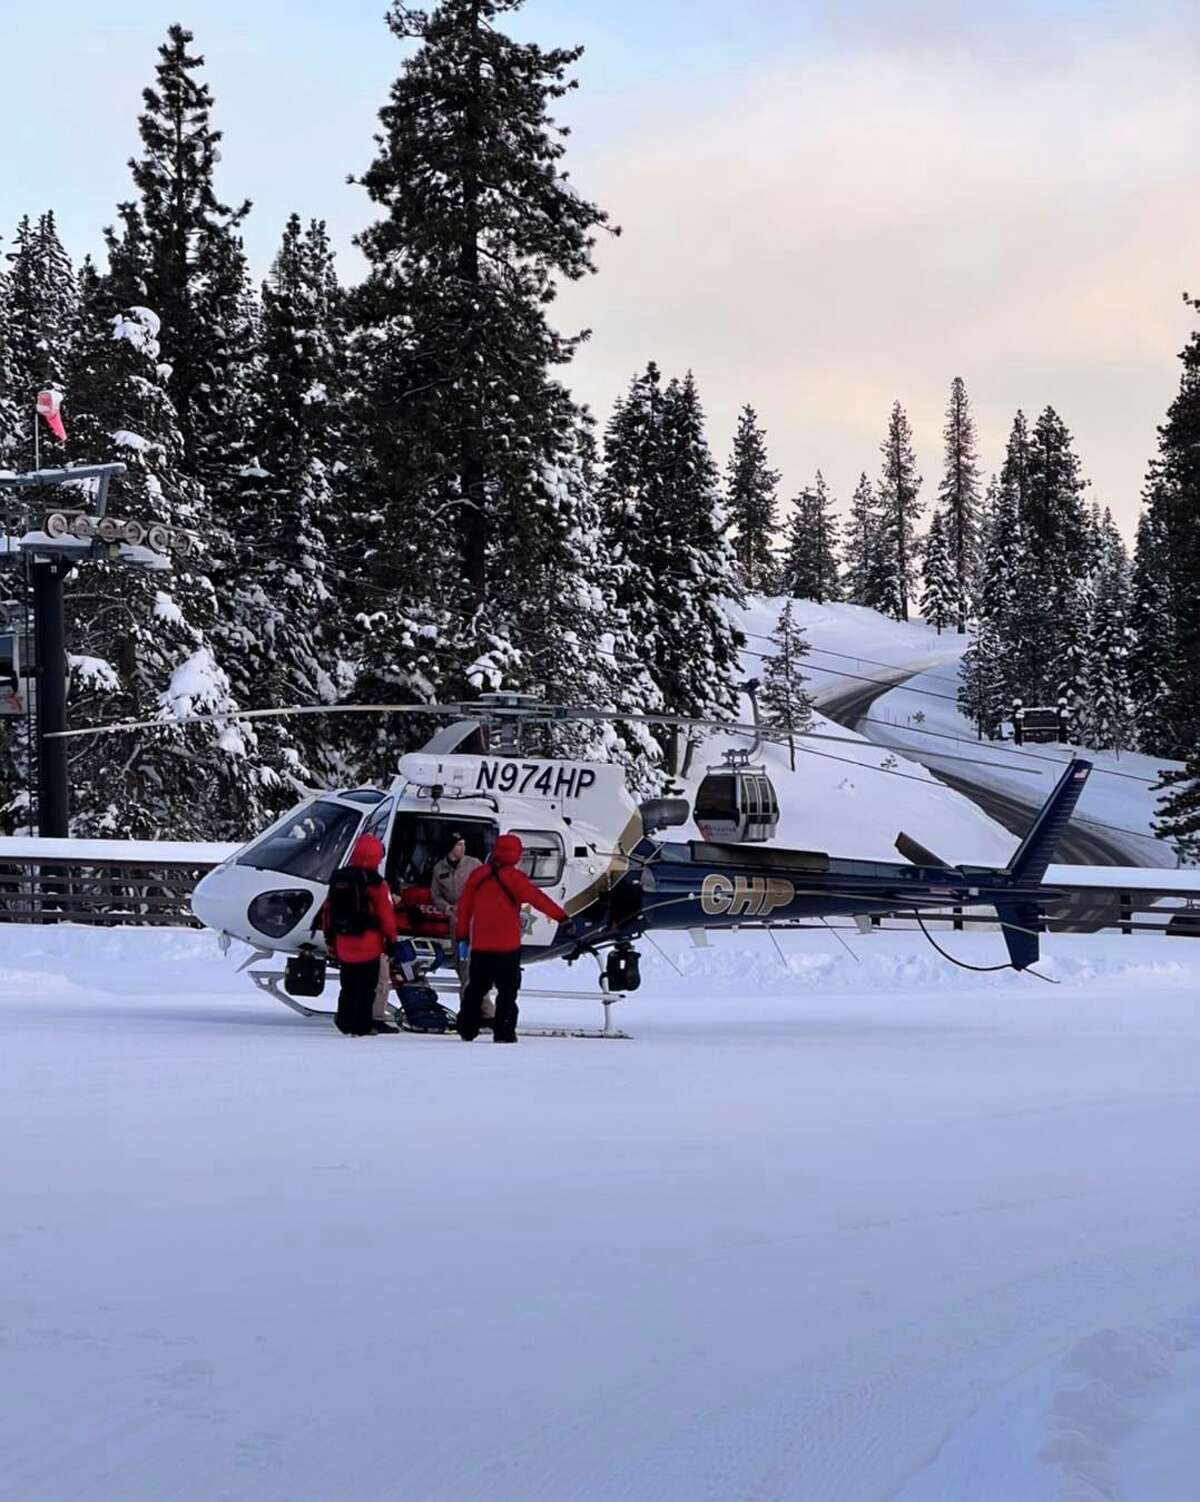 This photograph shows rescue crews with a helicopter that was used to search for Truckee resident Rory Angelotta, 43, who went missing at Northstar California Resort during a blizzard on Christmas Day. Rescue search operations the skier are being suspended, with authorities saying on Thursday that there is “no realistic possibility” he could have survived the severe storm conditions in the Sierra.